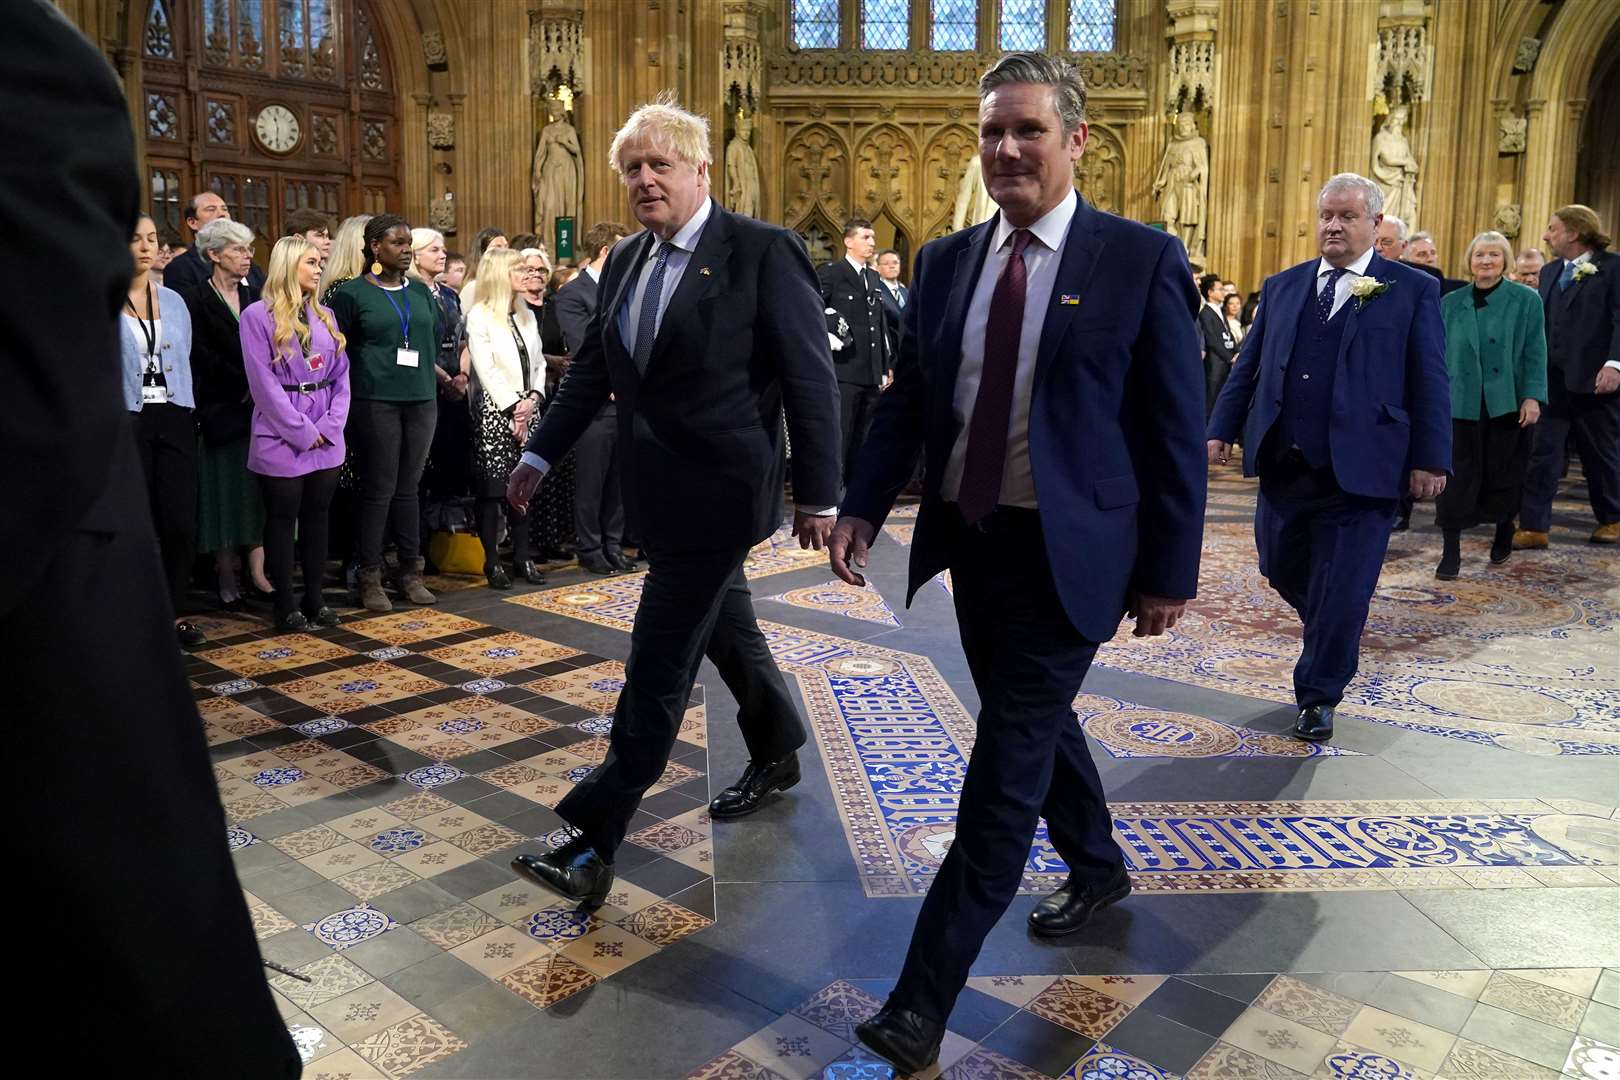 Prime Minister Boris Johnson and Labour Party leader Sir Keir Starmer walk through the Central Lobby at the Palace of Westminster ahead of the State Opening of Parliament (Yui Mok/PA)